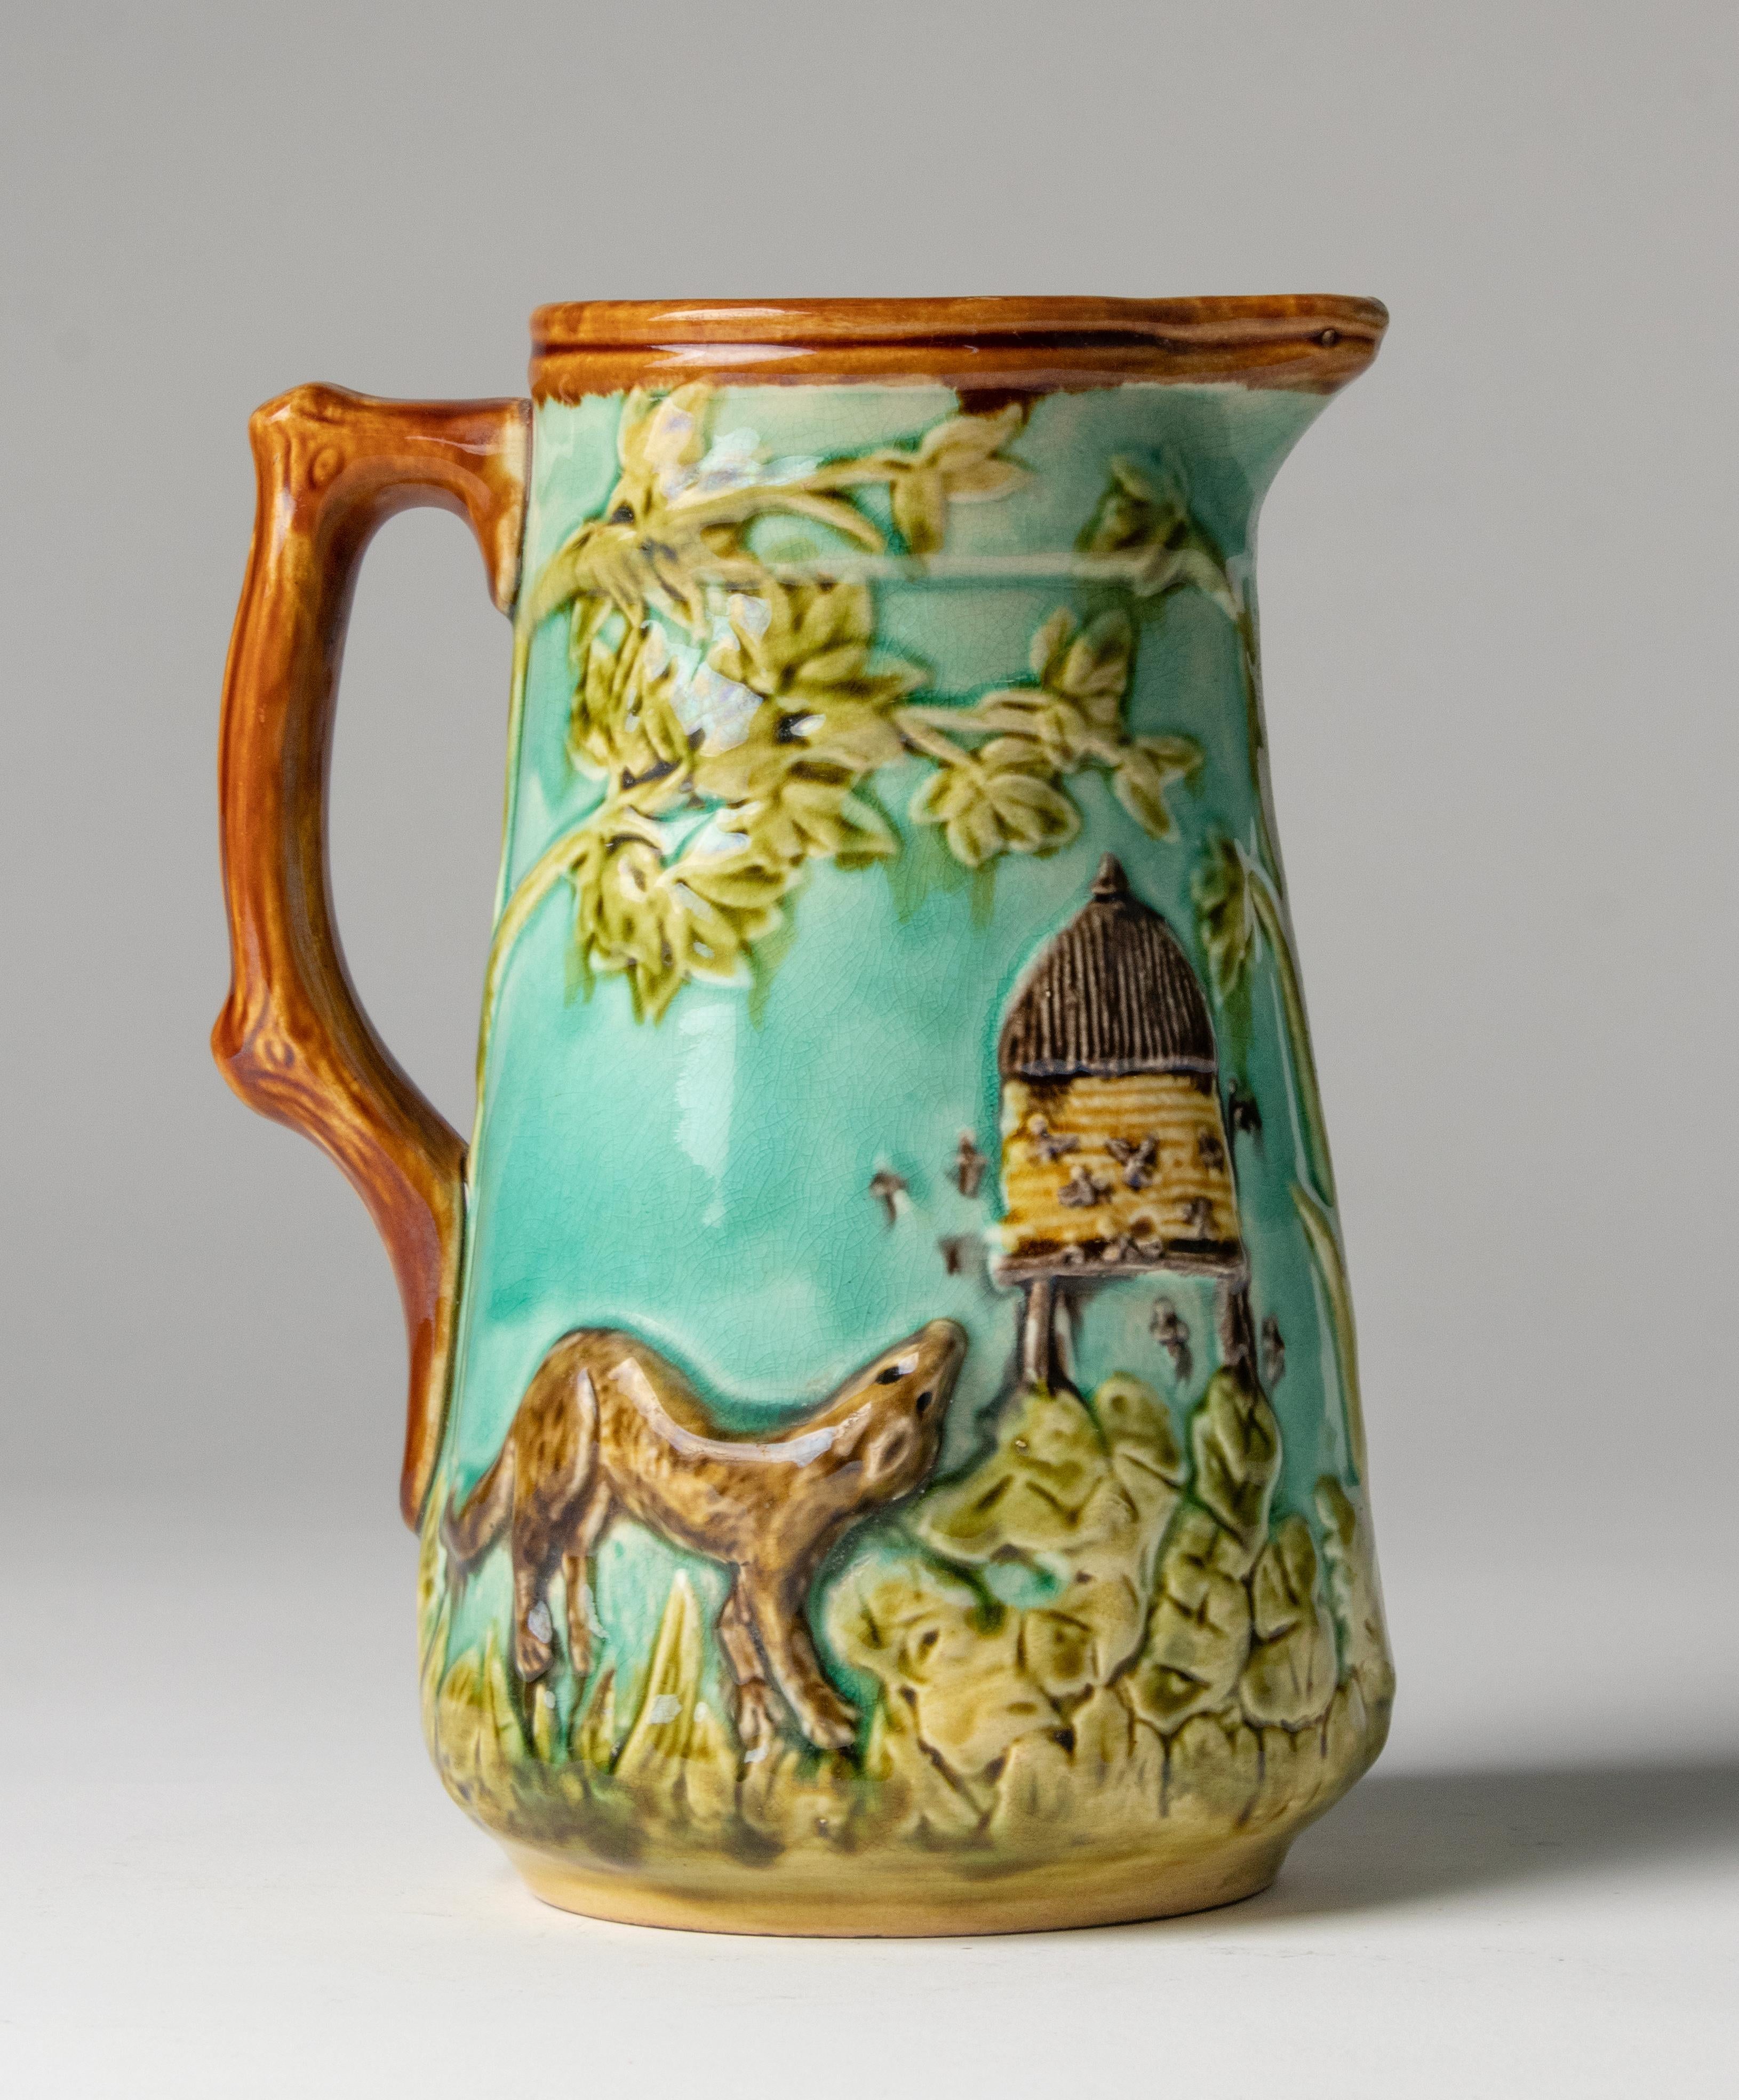 Beautiful large majolica jug. The jug has a lively and colorful decor, with a dog curiously looking at the beehive.
Clearly marked on the bottom: Mouzin Lecat & Cie. Nimy.
The jug is in good condition.